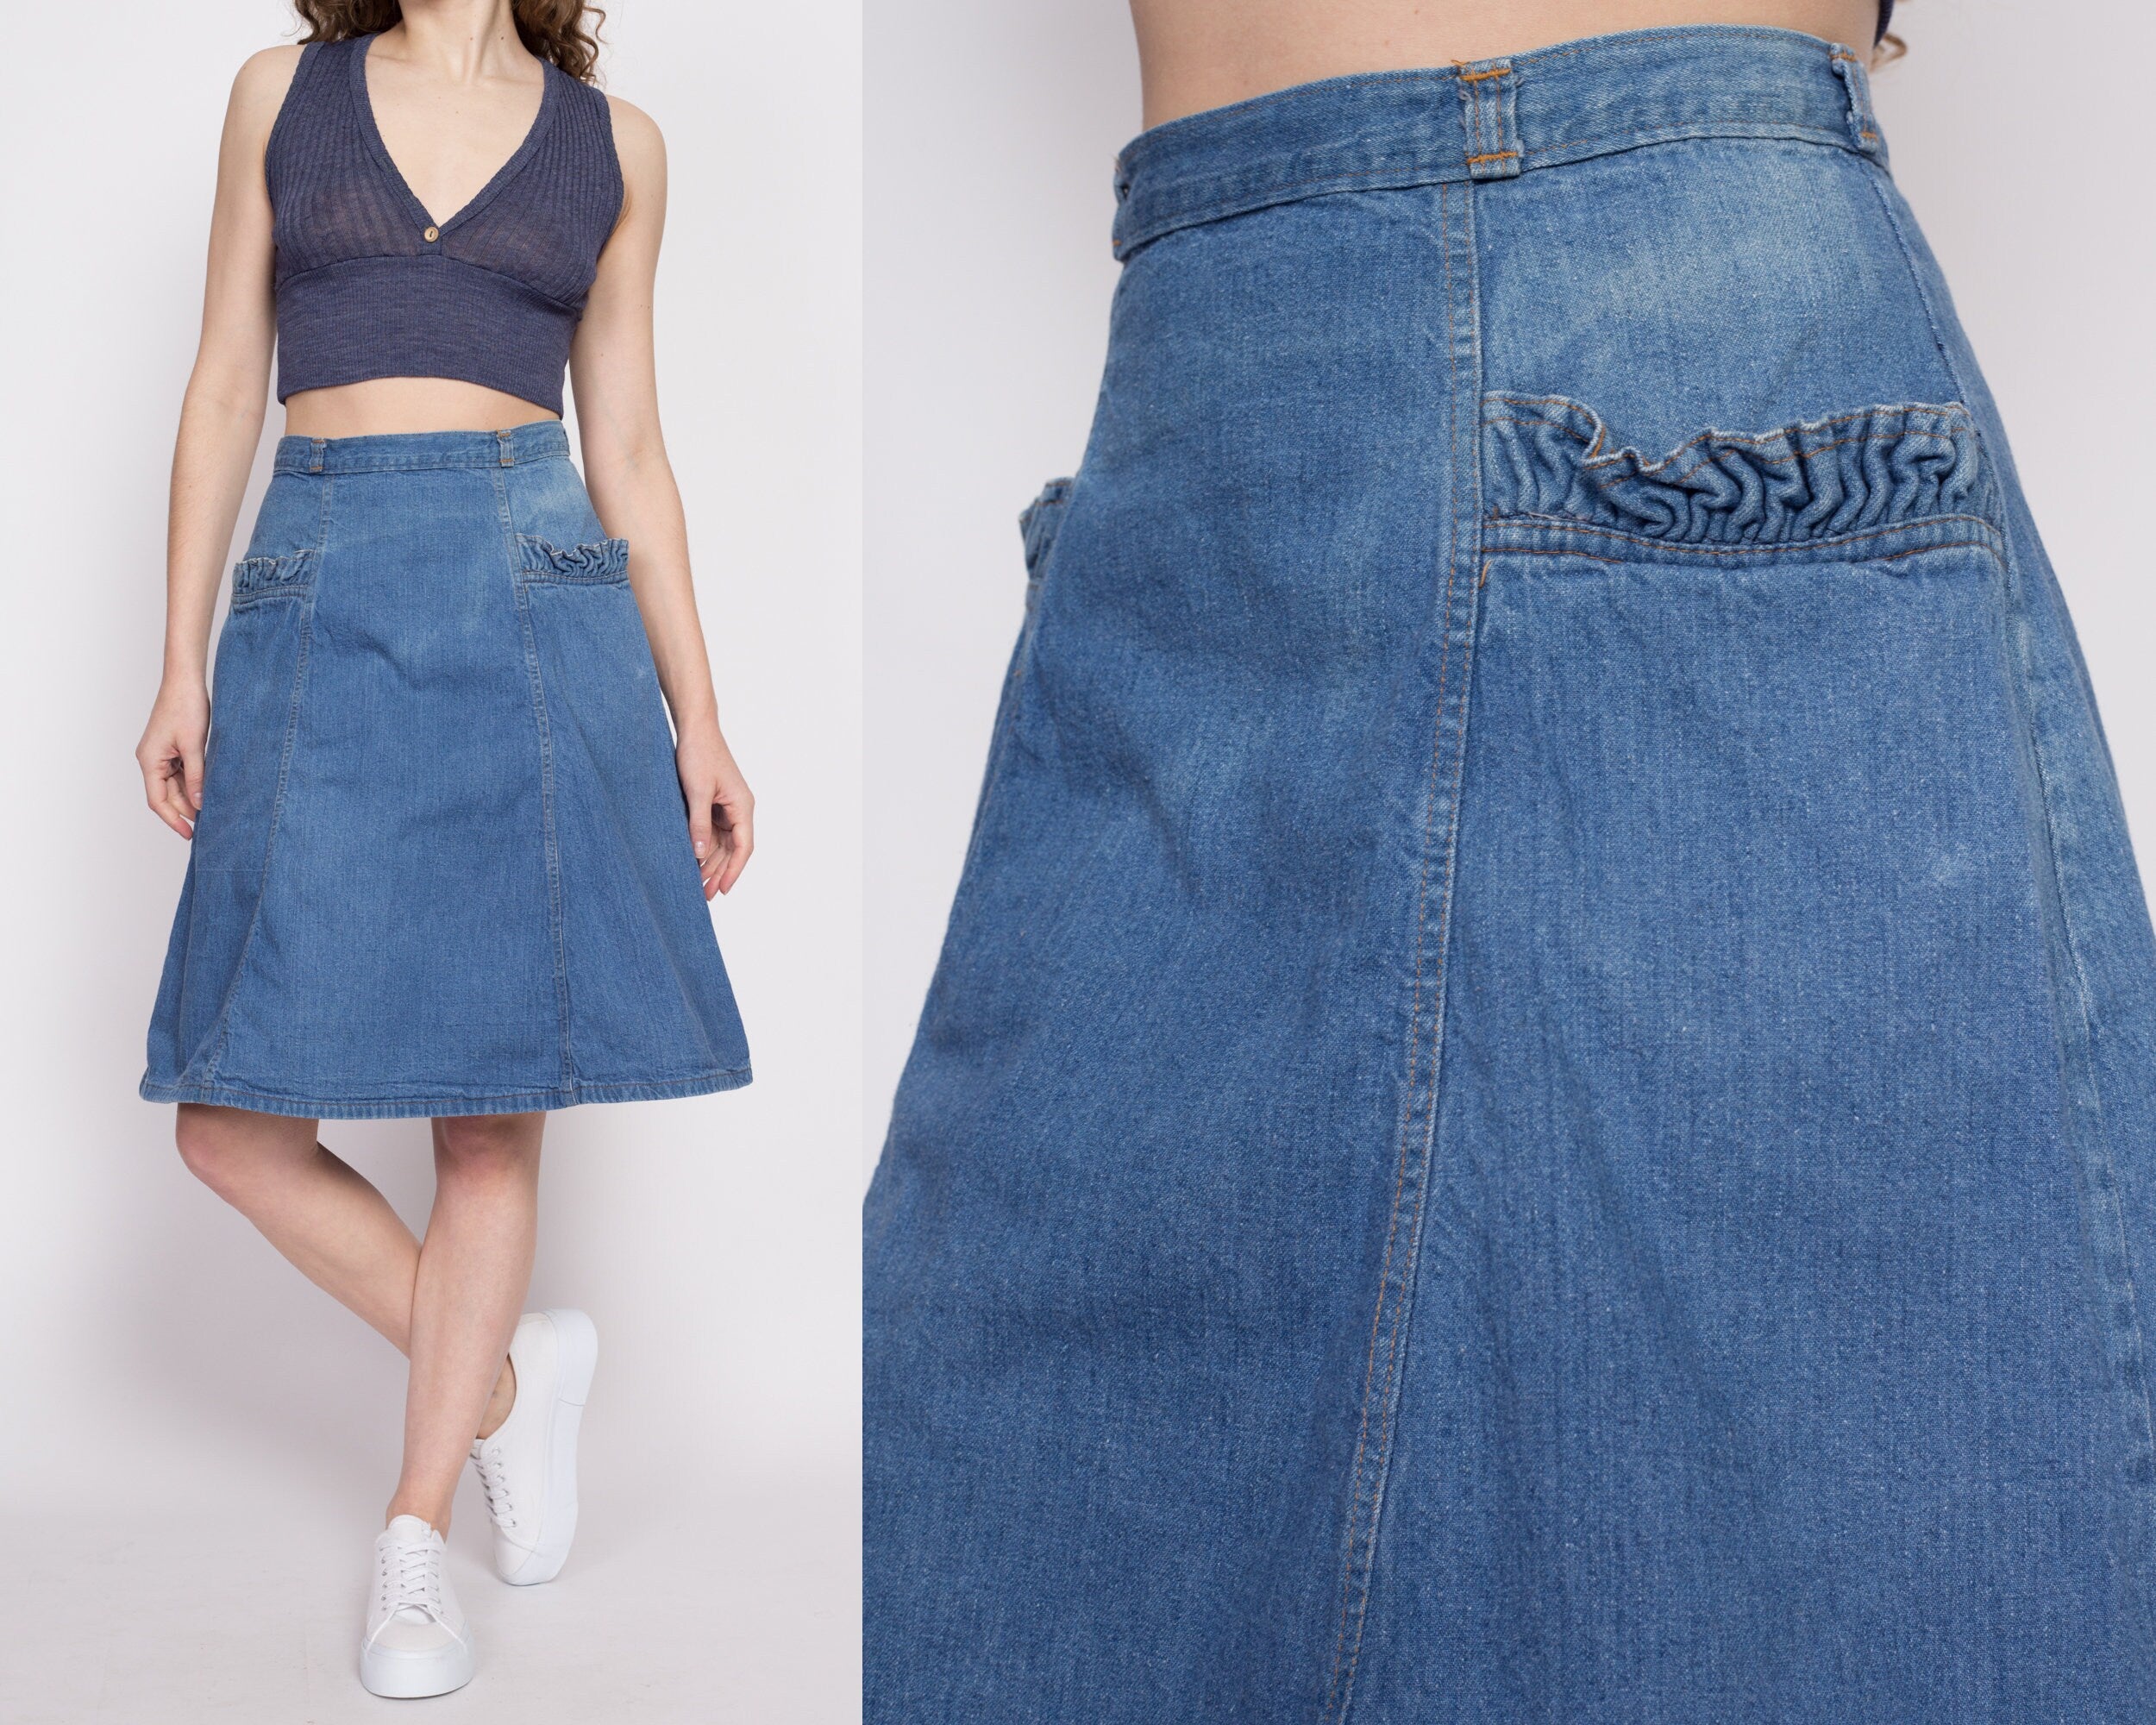 Sew Much To Give: Ruffled Jean Skirt for 